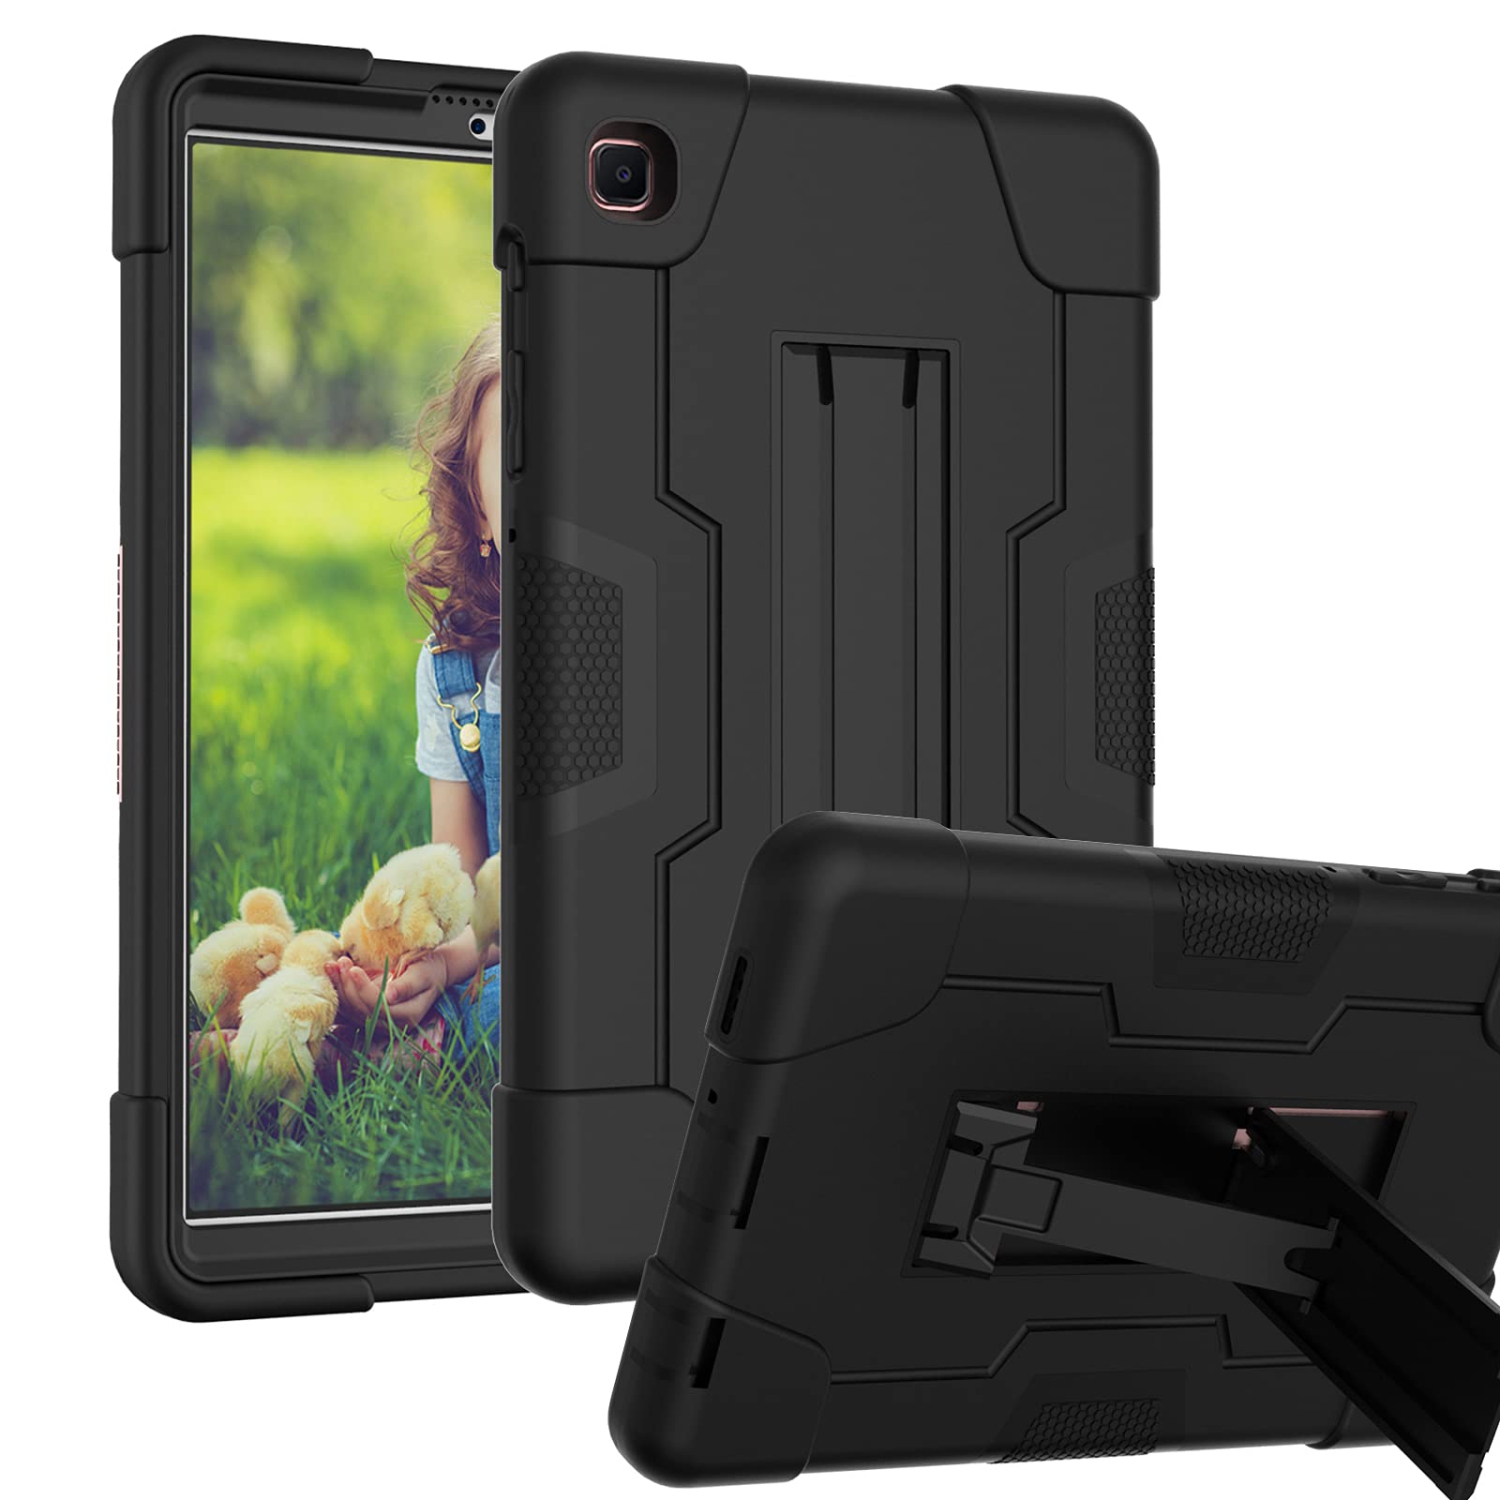 HAII Case for Samsung Galaxy Tab A7 Lite T220/T225, Full Body Rugged Kids Case with Kickstand Heavy Duty Shockproof Drop-Pro